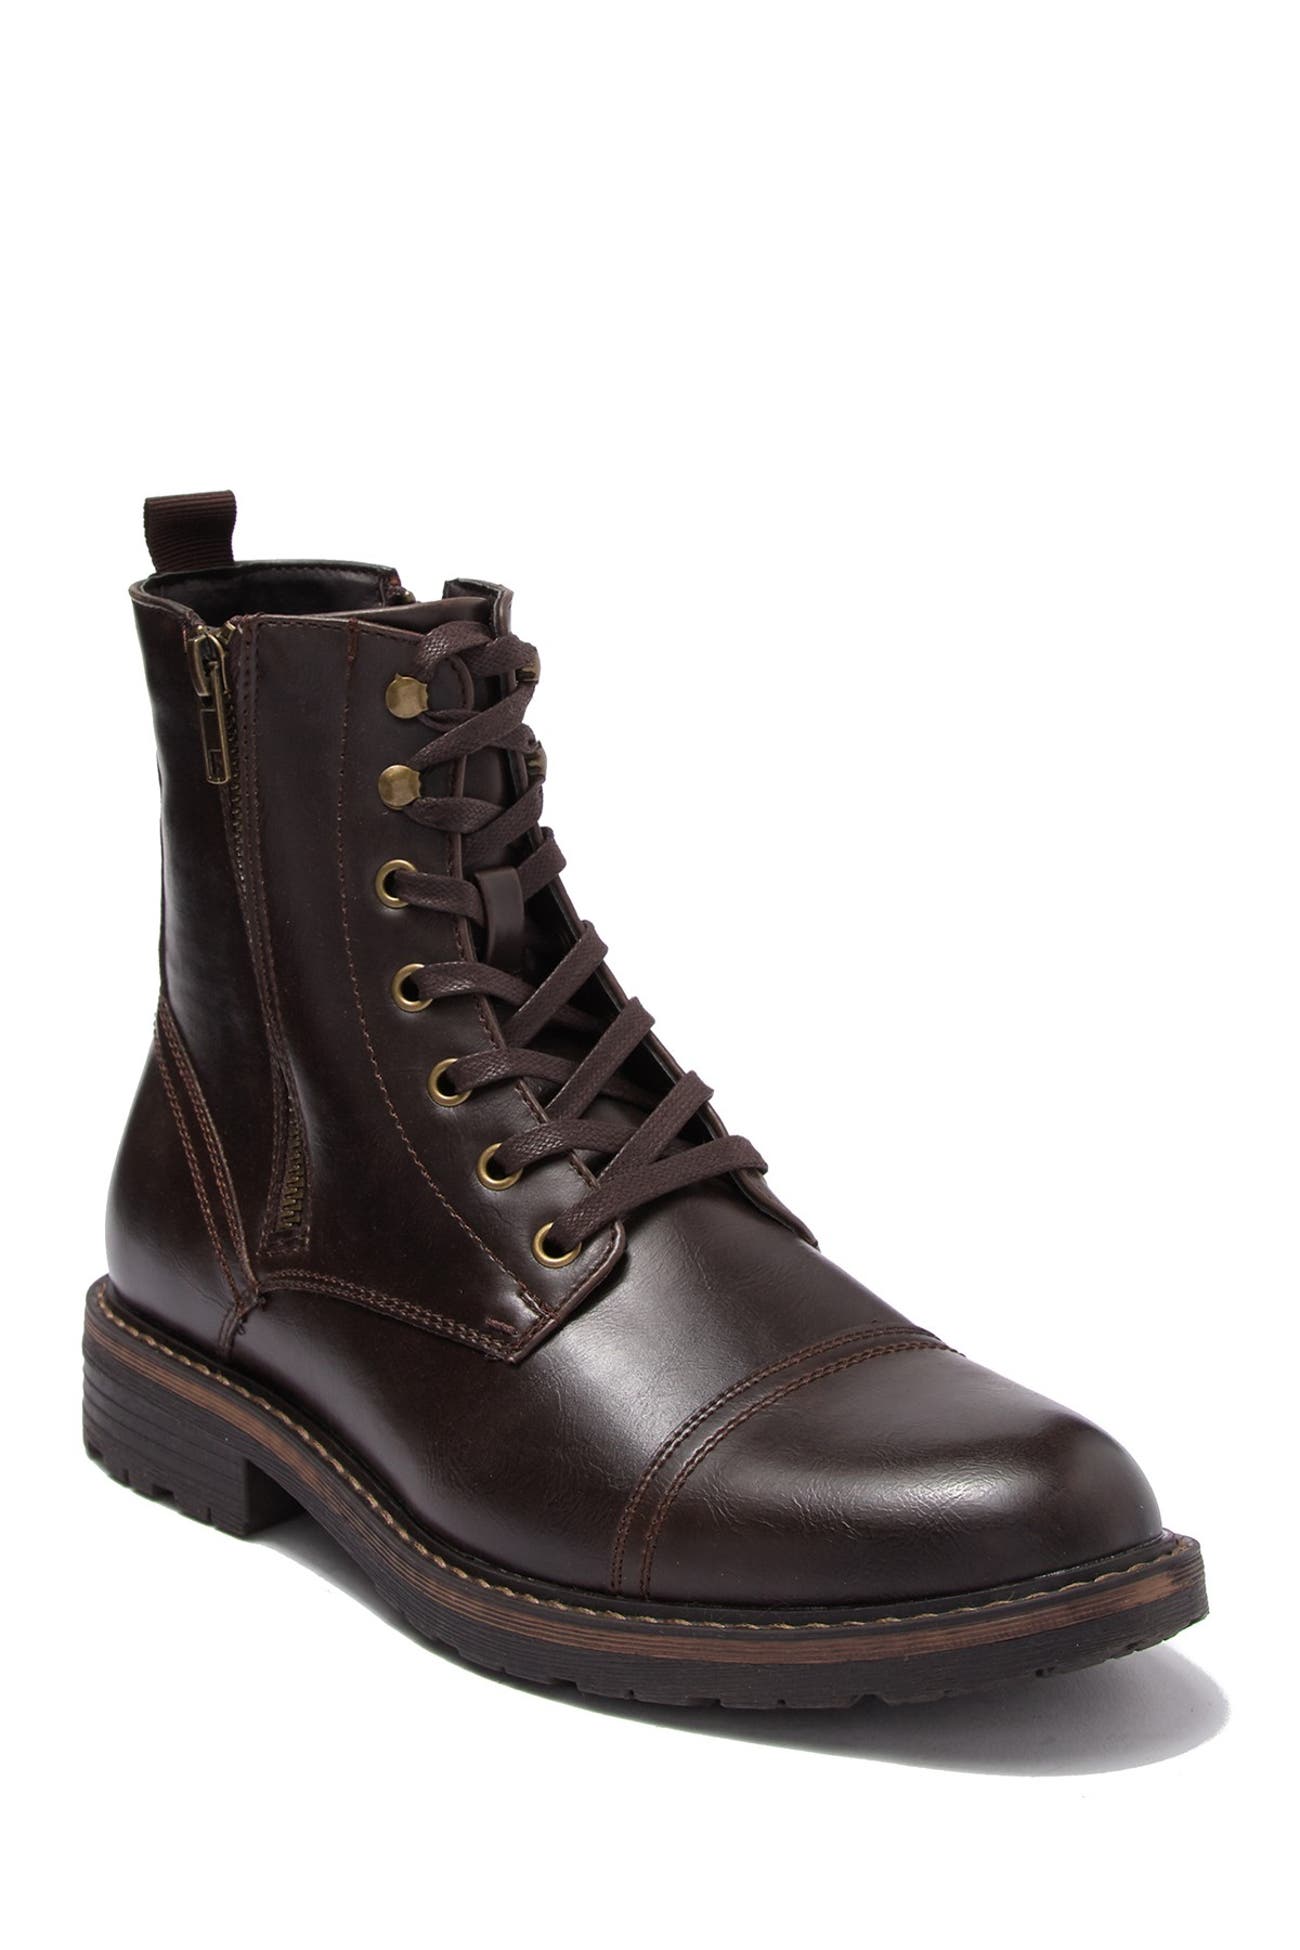 Unlisted, A Kenneth Cole Production | Lace-Up Combat Boot | Nordstrom Rack